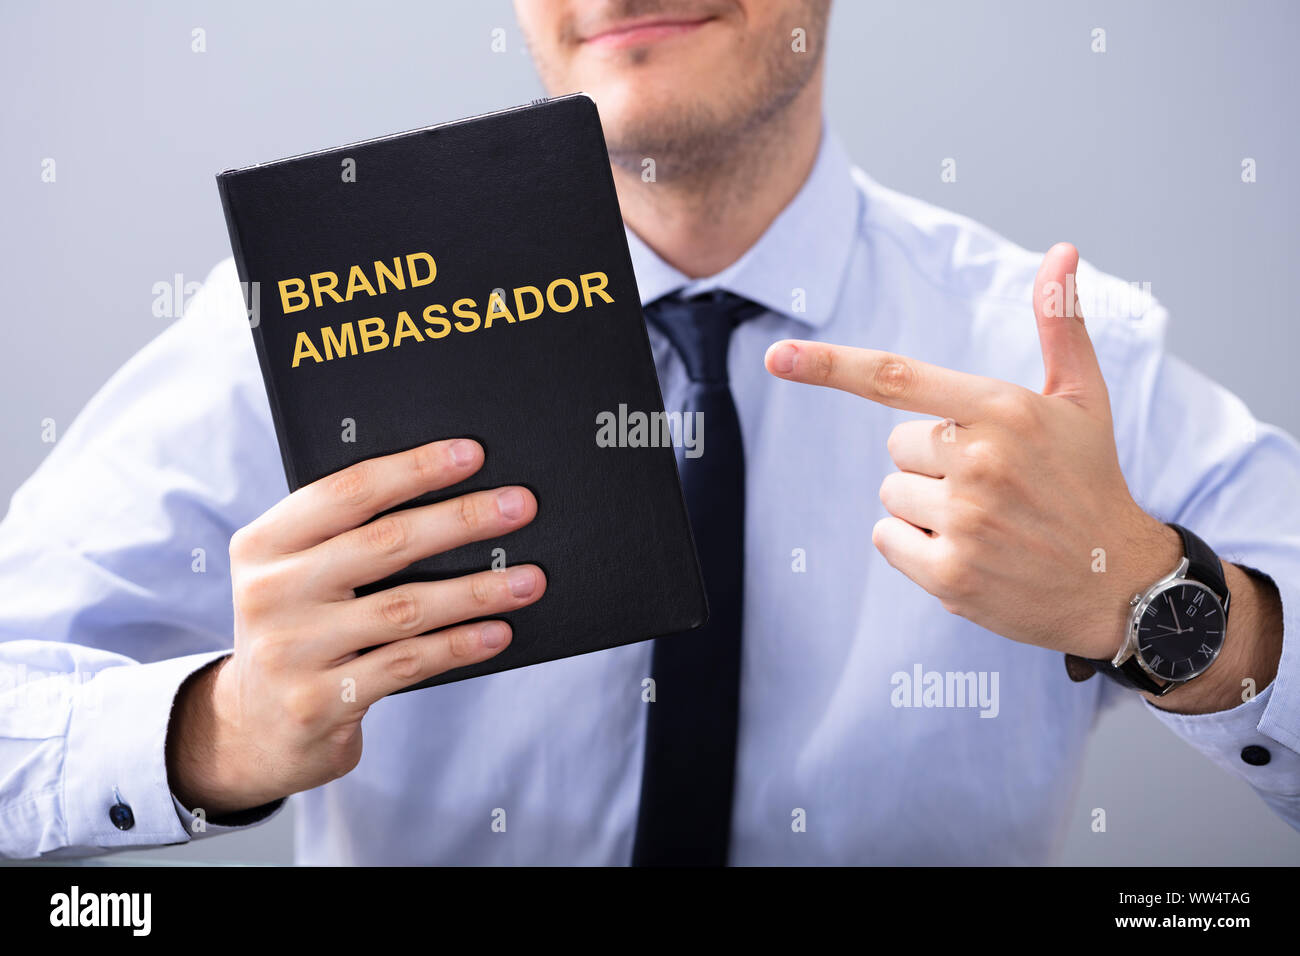 Man Holding Book With Brand Ambassador Text And Pointing Stock Photo